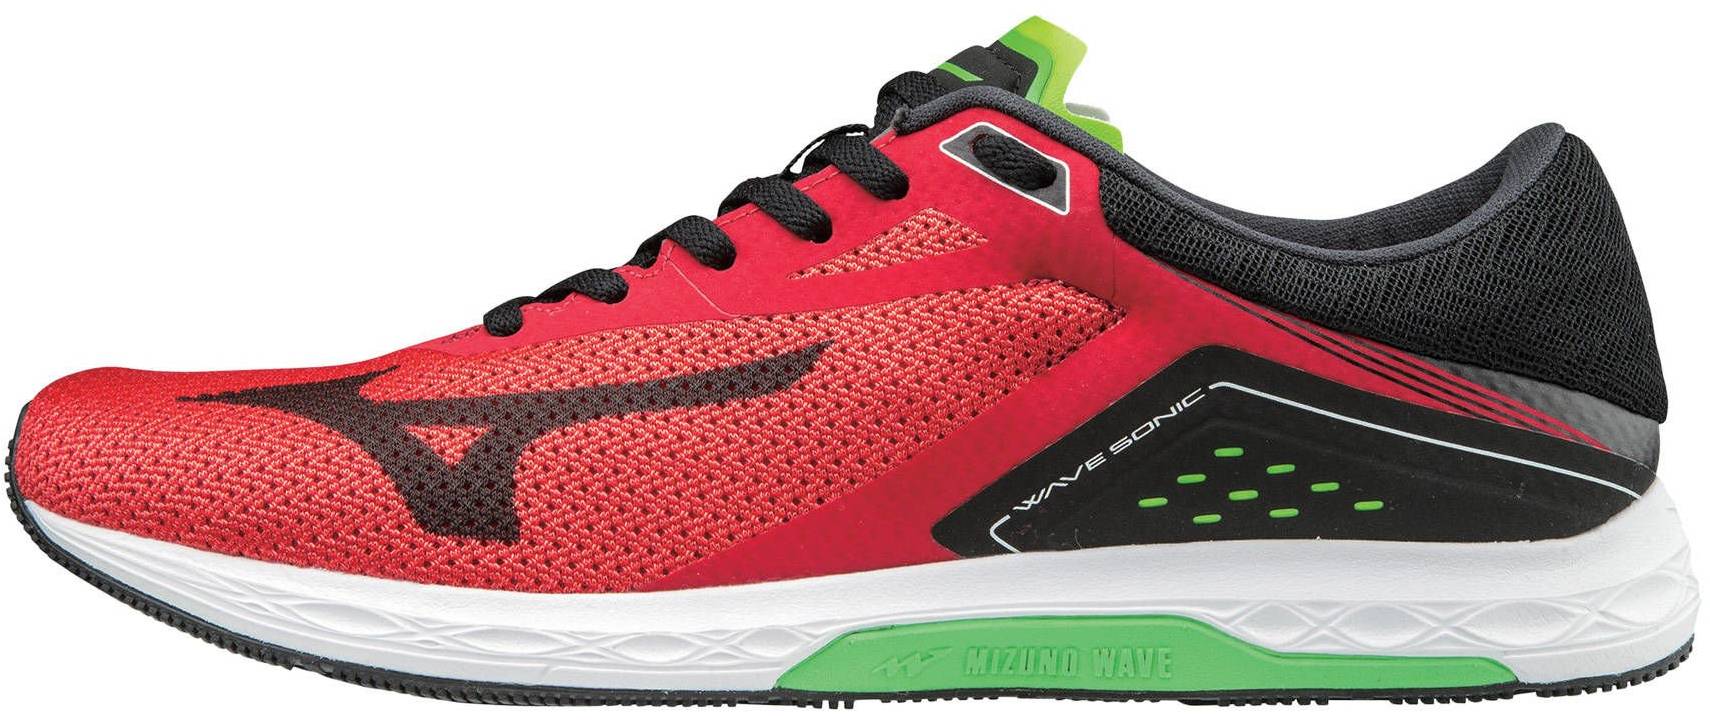 Only $64 + Review of Mizuno Wave Sonic 